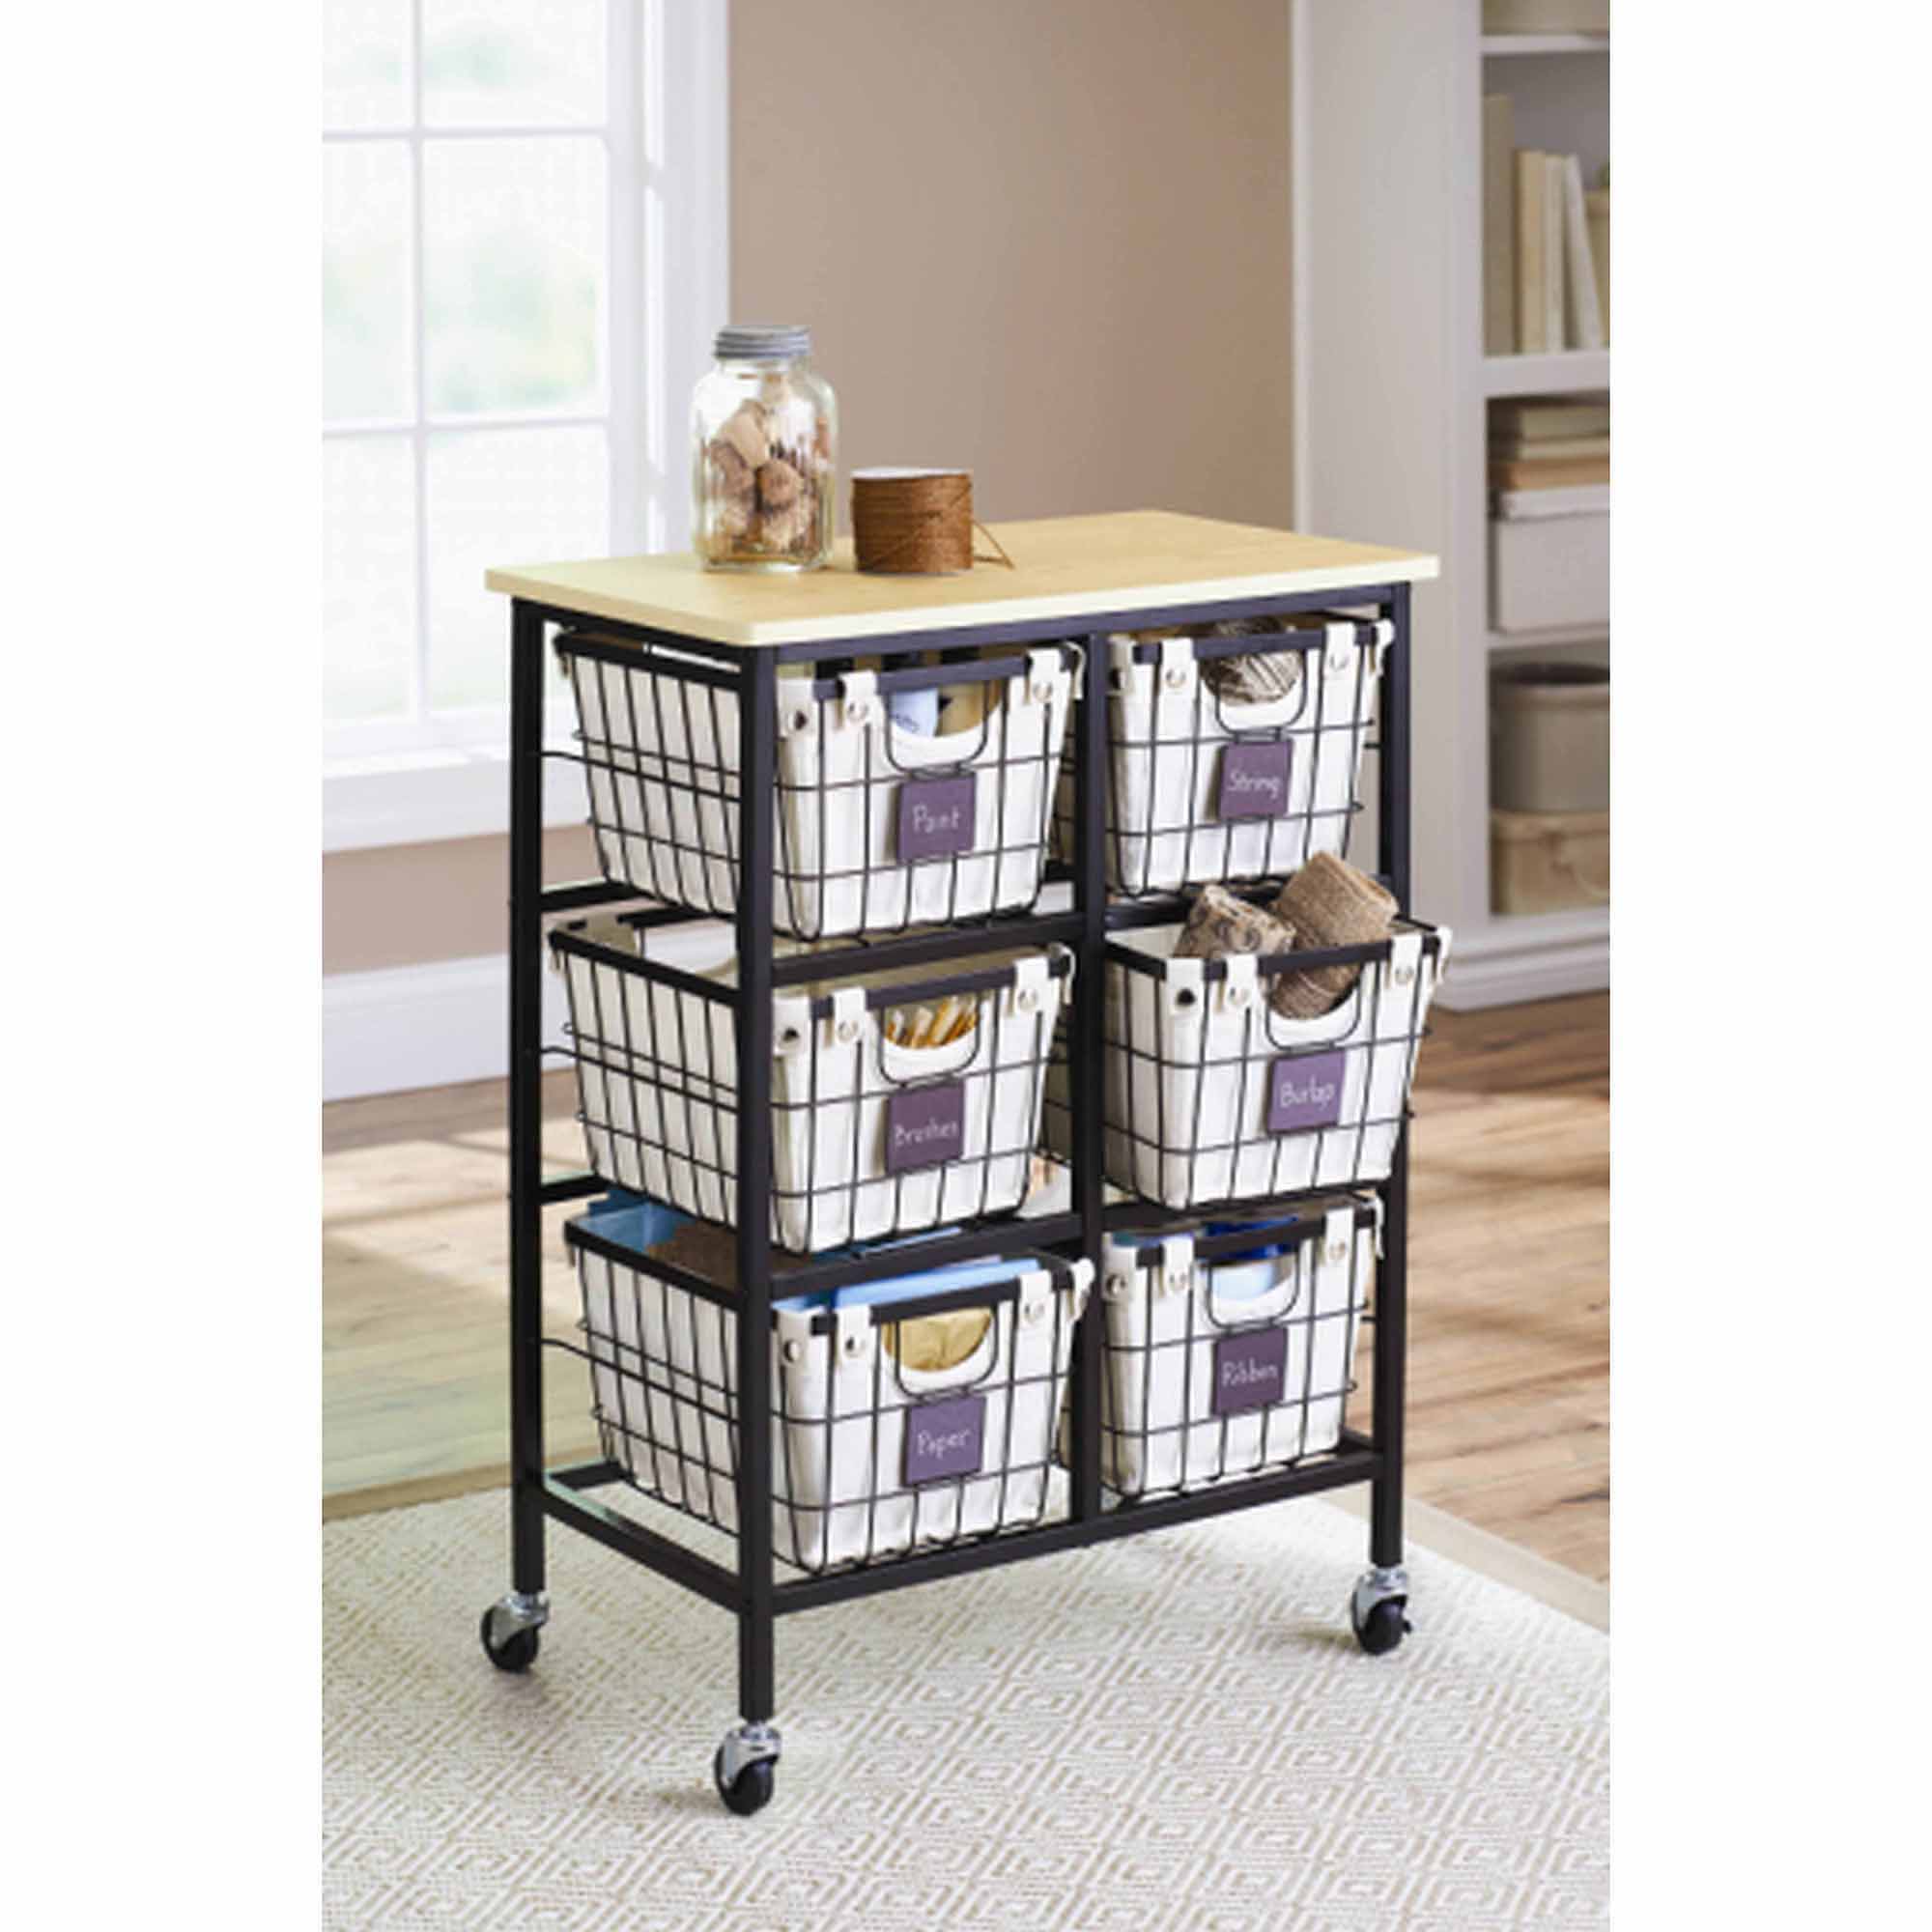 Better Homes and Gardens 6 Drawer Wire Rolling Cart, Black - image 1 of 5